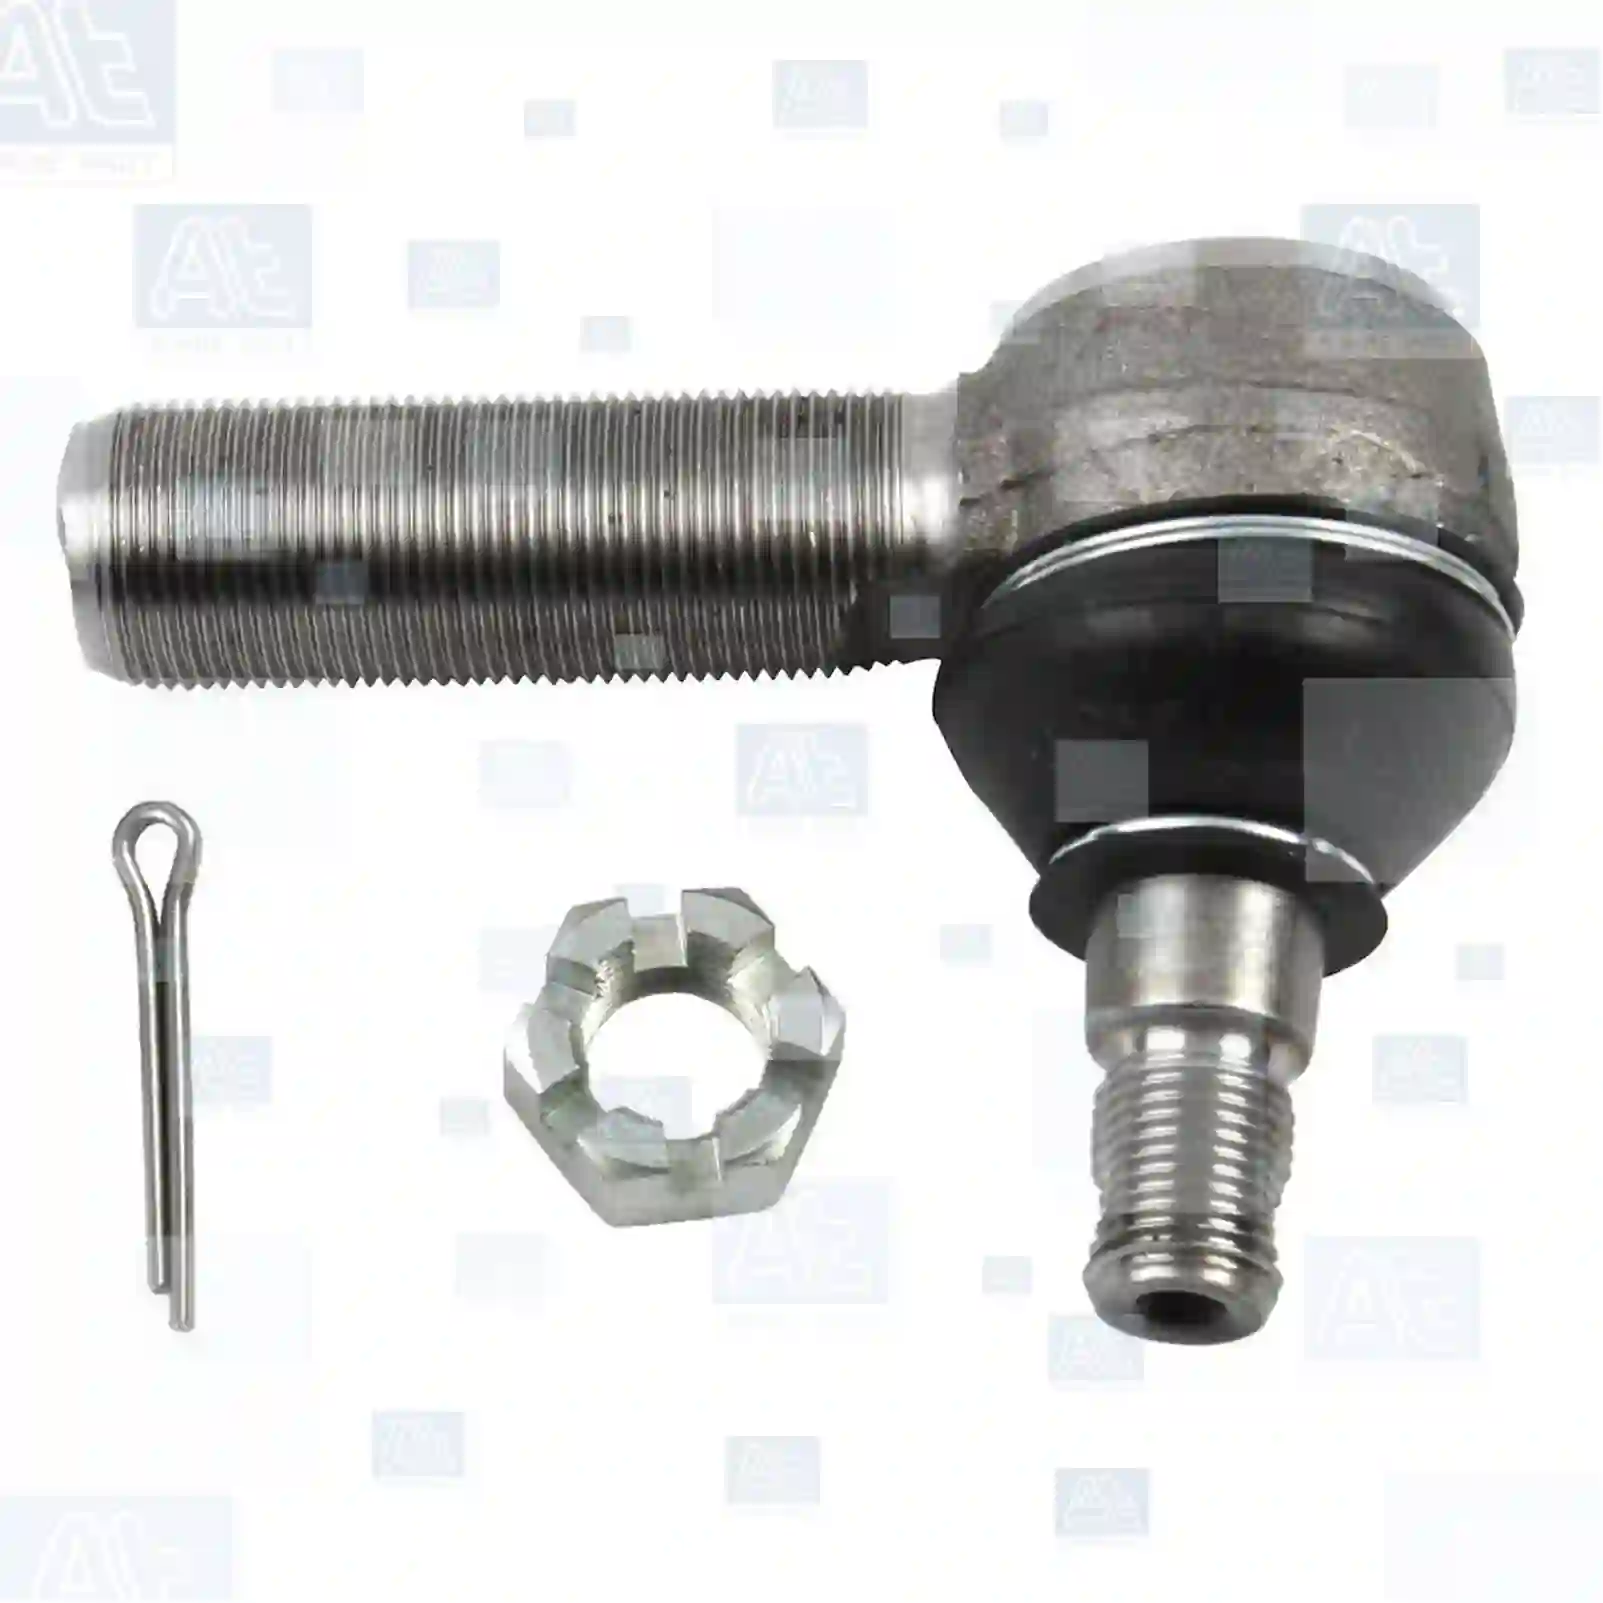 Ball joint, right hand thread, 77705350, 0608530, 608530, 42480024, 42491937, 5021446, 5021448, 6163543, 6792900, 42480024, 42491937, 81953010077, 81953010388, 81953016134, 81953016142, 81953016303, 81953016321, 85400002447, 85400002448, 85400003302, 88953016004, 0003300335, 0003300635, 0003302410, 0003306735, 0003308535, 0003308735, 0003382410, 0003384110, 0004607248, 0004633229, 0013304835, 0024601648, 4603301235, 6313380510, 0003406252, 5000514097, 5000807554, 5000814097, 5001844136, 5001860123, 5001860770, 1190778, 1517449, 1518142, ZG40371-0008 ||  77705350 At Spare Part | Engine, Accelerator Pedal, Camshaft, Connecting Rod, Crankcase, Crankshaft, Cylinder Head, Engine Suspension Mountings, Exhaust Manifold, Exhaust Gas Recirculation, Filter Kits, Flywheel Housing, General Overhaul Kits, Engine, Intake Manifold, Oil Cleaner, Oil Cooler, Oil Filter, Oil Pump, Oil Sump, Piston & Liner, Sensor & Switch, Timing Case, Turbocharger, Cooling System, Belt Tensioner, Coolant Filter, Coolant Pipe, Corrosion Prevention Agent, Drive, Expansion Tank, Fan, Intercooler, Monitors & Gauges, Radiator, Thermostat, V-Belt / Timing belt, Water Pump, Fuel System, Electronical Injector Unit, Feed Pump, Fuel Filter, cpl., Fuel Gauge Sender,  Fuel Line, Fuel Pump, Fuel Tank, Injection Line Kit, Injection Pump, Exhaust System, Clutch & Pedal, Gearbox, Propeller Shaft, Axles, Brake System, Hubs & Wheels, Suspension, Leaf Spring, Universal Parts / Accessories, Steering, Electrical System, Cabin Ball joint, right hand thread, 77705350, 0608530, 608530, 42480024, 42491937, 5021446, 5021448, 6163543, 6792900, 42480024, 42491937, 81953010077, 81953010388, 81953016134, 81953016142, 81953016303, 81953016321, 85400002447, 85400002448, 85400003302, 88953016004, 0003300335, 0003300635, 0003302410, 0003306735, 0003308535, 0003308735, 0003382410, 0003384110, 0004607248, 0004633229, 0013304835, 0024601648, 4603301235, 6313380510, 0003406252, 5000514097, 5000807554, 5000814097, 5001844136, 5001860123, 5001860770, 1190778, 1517449, 1518142, ZG40371-0008 ||  77705350 At Spare Part | Engine, Accelerator Pedal, Camshaft, Connecting Rod, Crankcase, Crankshaft, Cylinder Head, Engine Suspension Mountings, Exhaust Manifold, Exhaust Gas Recirculation, Filter Kits, Flywheel Housing, General Overhaul Kits, Engine, Intake Manifold, Oil Cleaner, Oil Cooler, Oil Filter, Oil Pump, Oil Sump, Piston & Liner, Sensor & Switch, Timing Case, Turbocharger, Cooling System, Belt Tensioner, Coolant Filter, Coolant Pipe, Corrosion Prevention Agent, Drive, Expansion Tank, Fan, Intercooler, Monitors & Gauges, Radiator, Thermostat, V-Belt / Timing belt, Water Pump, Fuel System, Electronical Injector Unit, Feed Pump, Fuel Filter, cpl., Fuel Gauge Sender,  Fuel Line, Fuel Pump, Fuel Tank, Injection Line Kit, Injection Pump, Exhaust System, Clutch & Pedal, Gearbox, Propeller Shaft, Axles, Brake System, Hubs & Wheels, Suspension, Leaf Spring, Universal Parts / Accessories, Steering, Electrical System, Cabin